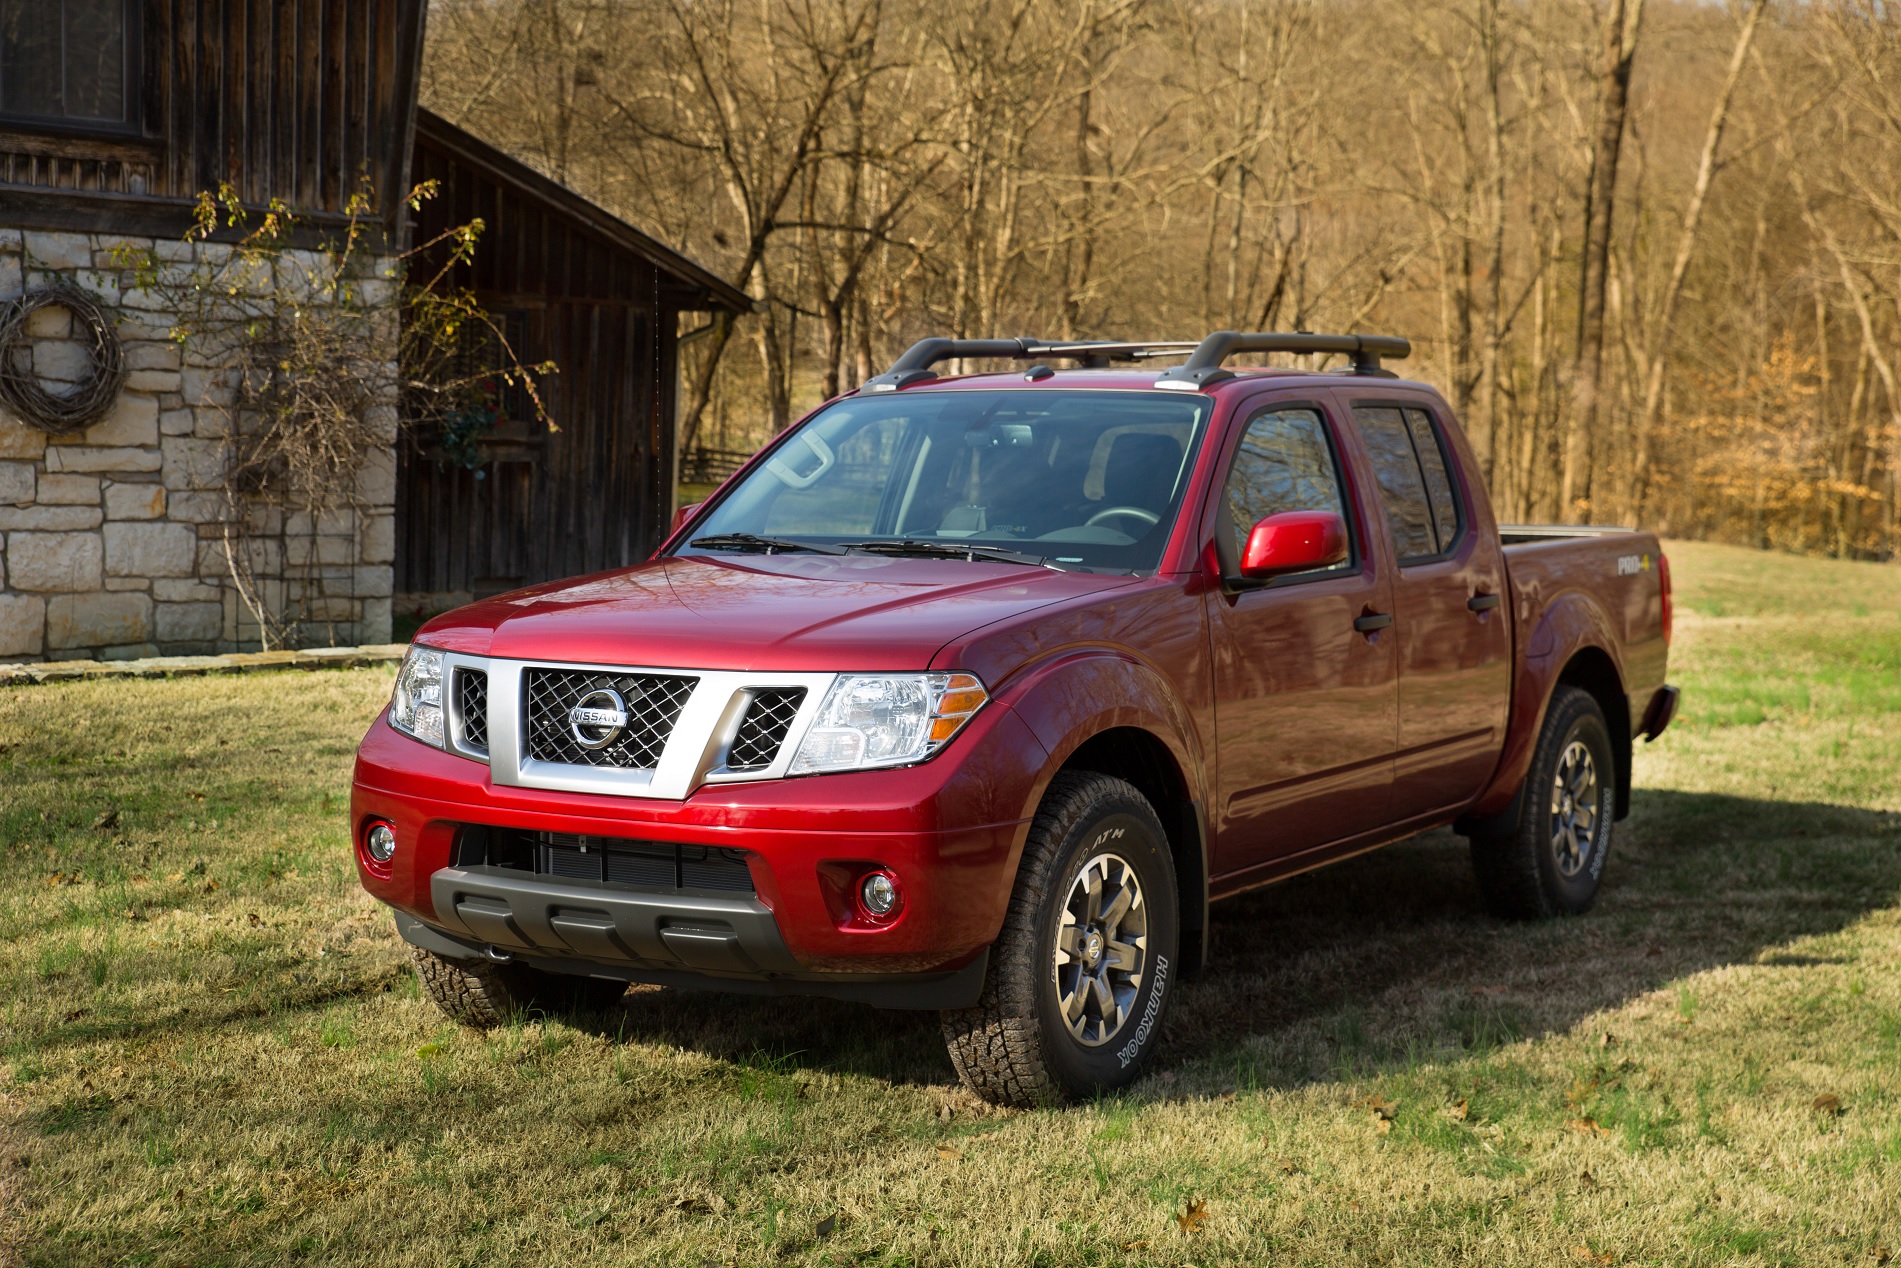 2020 Nissan Frontier parked in grass